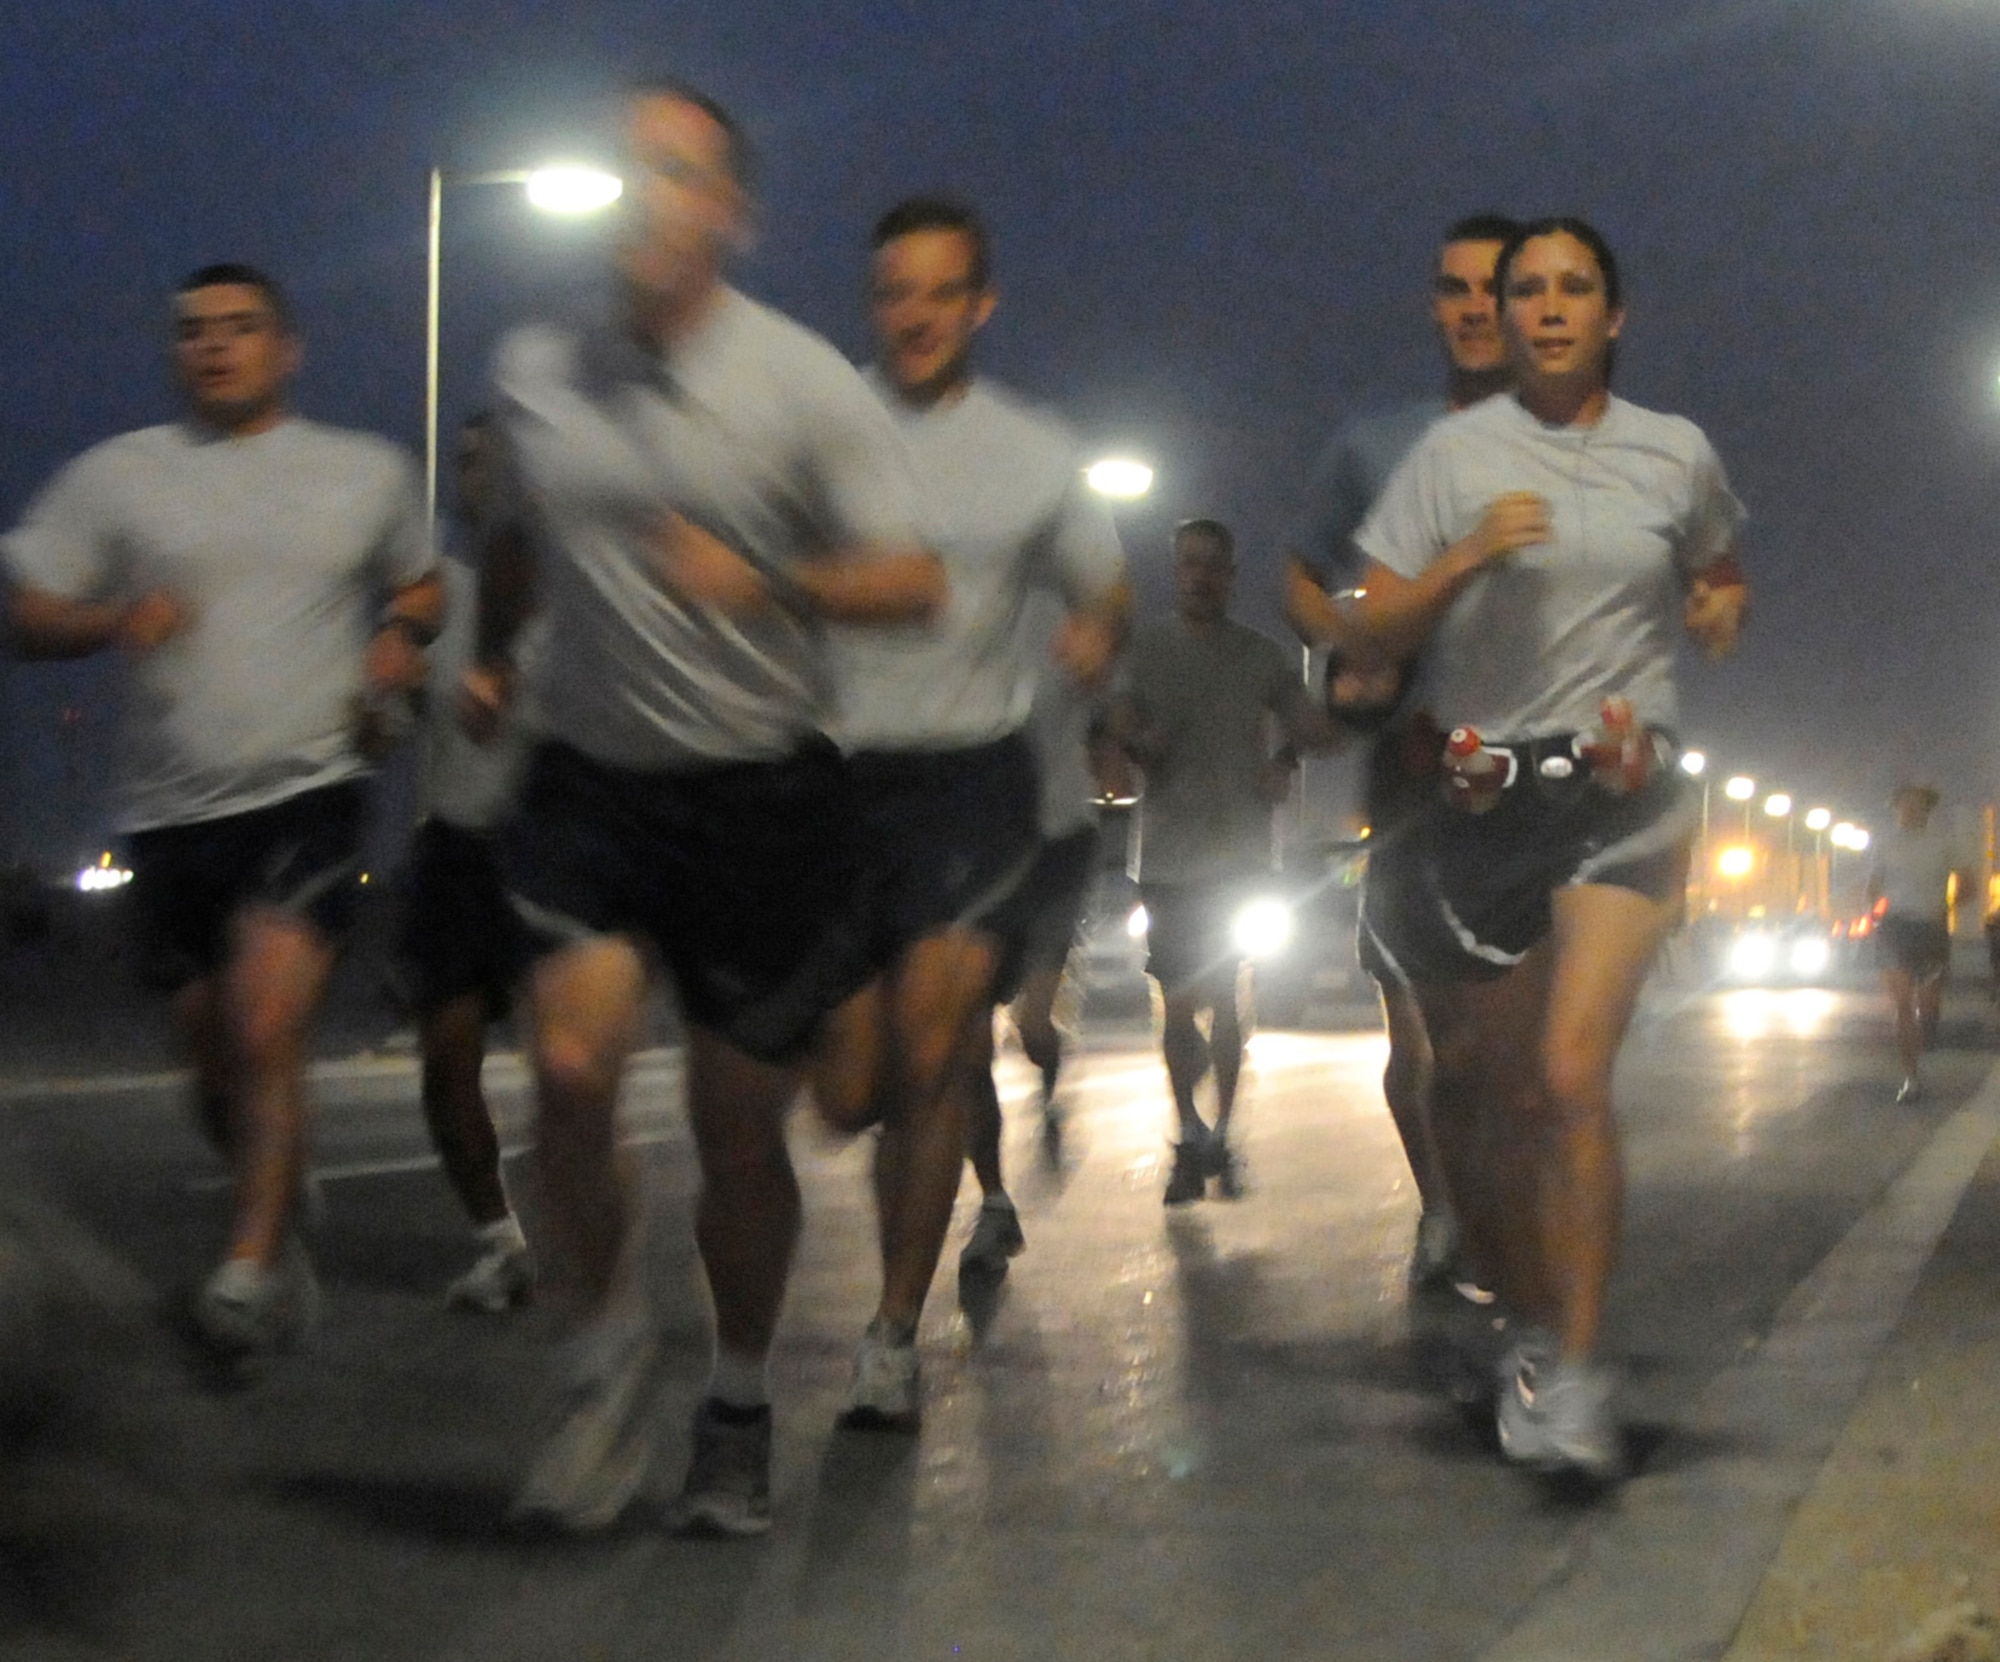 SOUTHWEST ASIA -- 1st Lt. Jessica Lopez, far right, begins a marathon with a group of fellow Air Force runners here March 2. In conjunction with her marathon, the wing organized a 5k race for members to compete in and support the C-17A pilot, who was running at the same time as her mother, Dawn, was running the L.A. Marathon. (U.S. Air Force photo/Senior Airman Domonique Simmons)